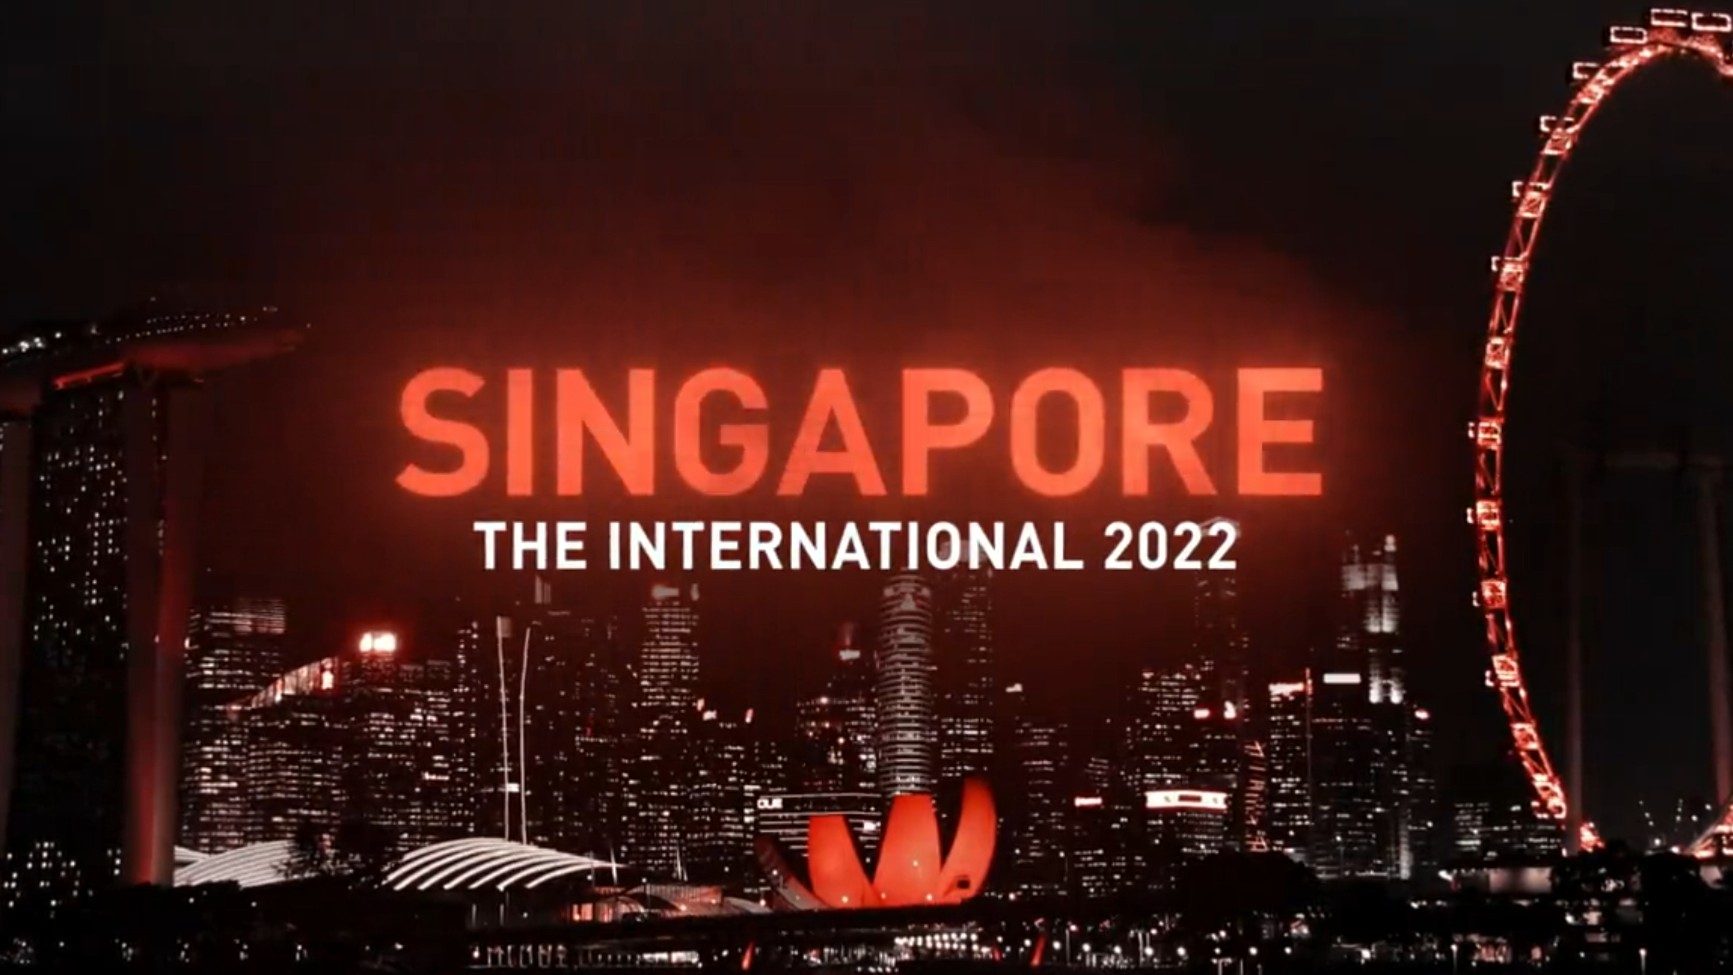 ‘Dota 2’s’ The International to be held in Singapore